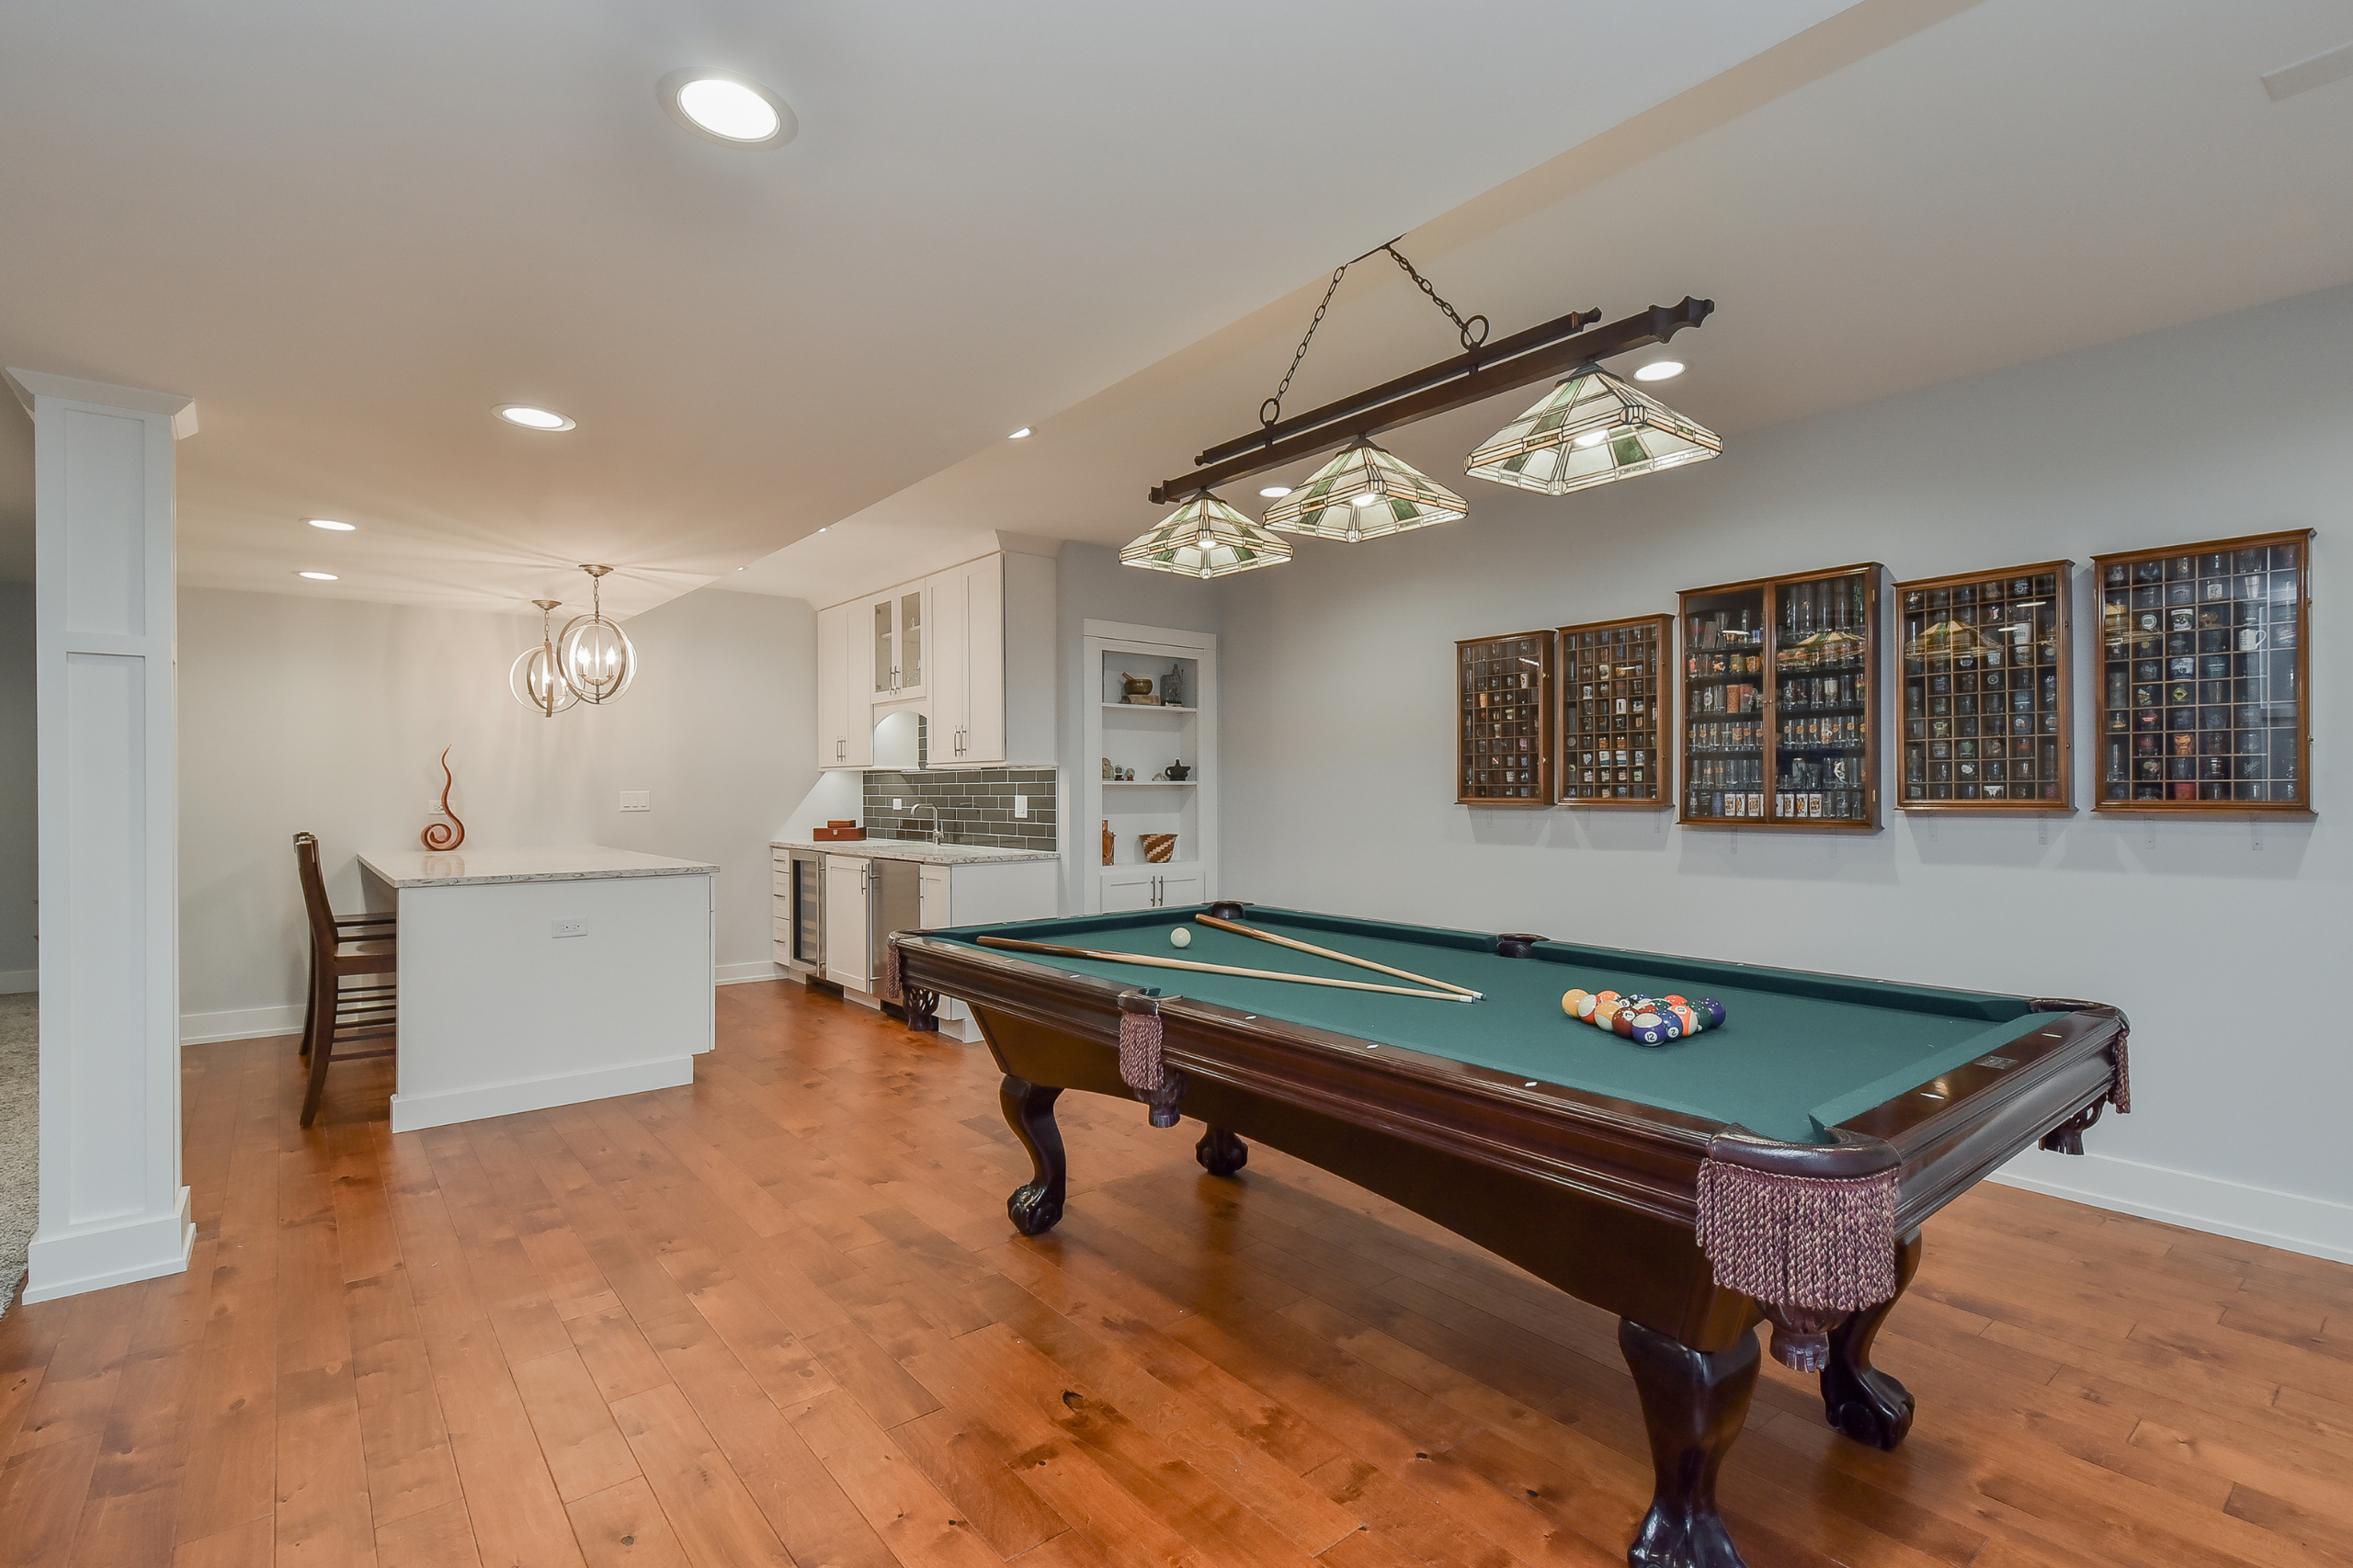 Gaming and Pool Table Room Sizes